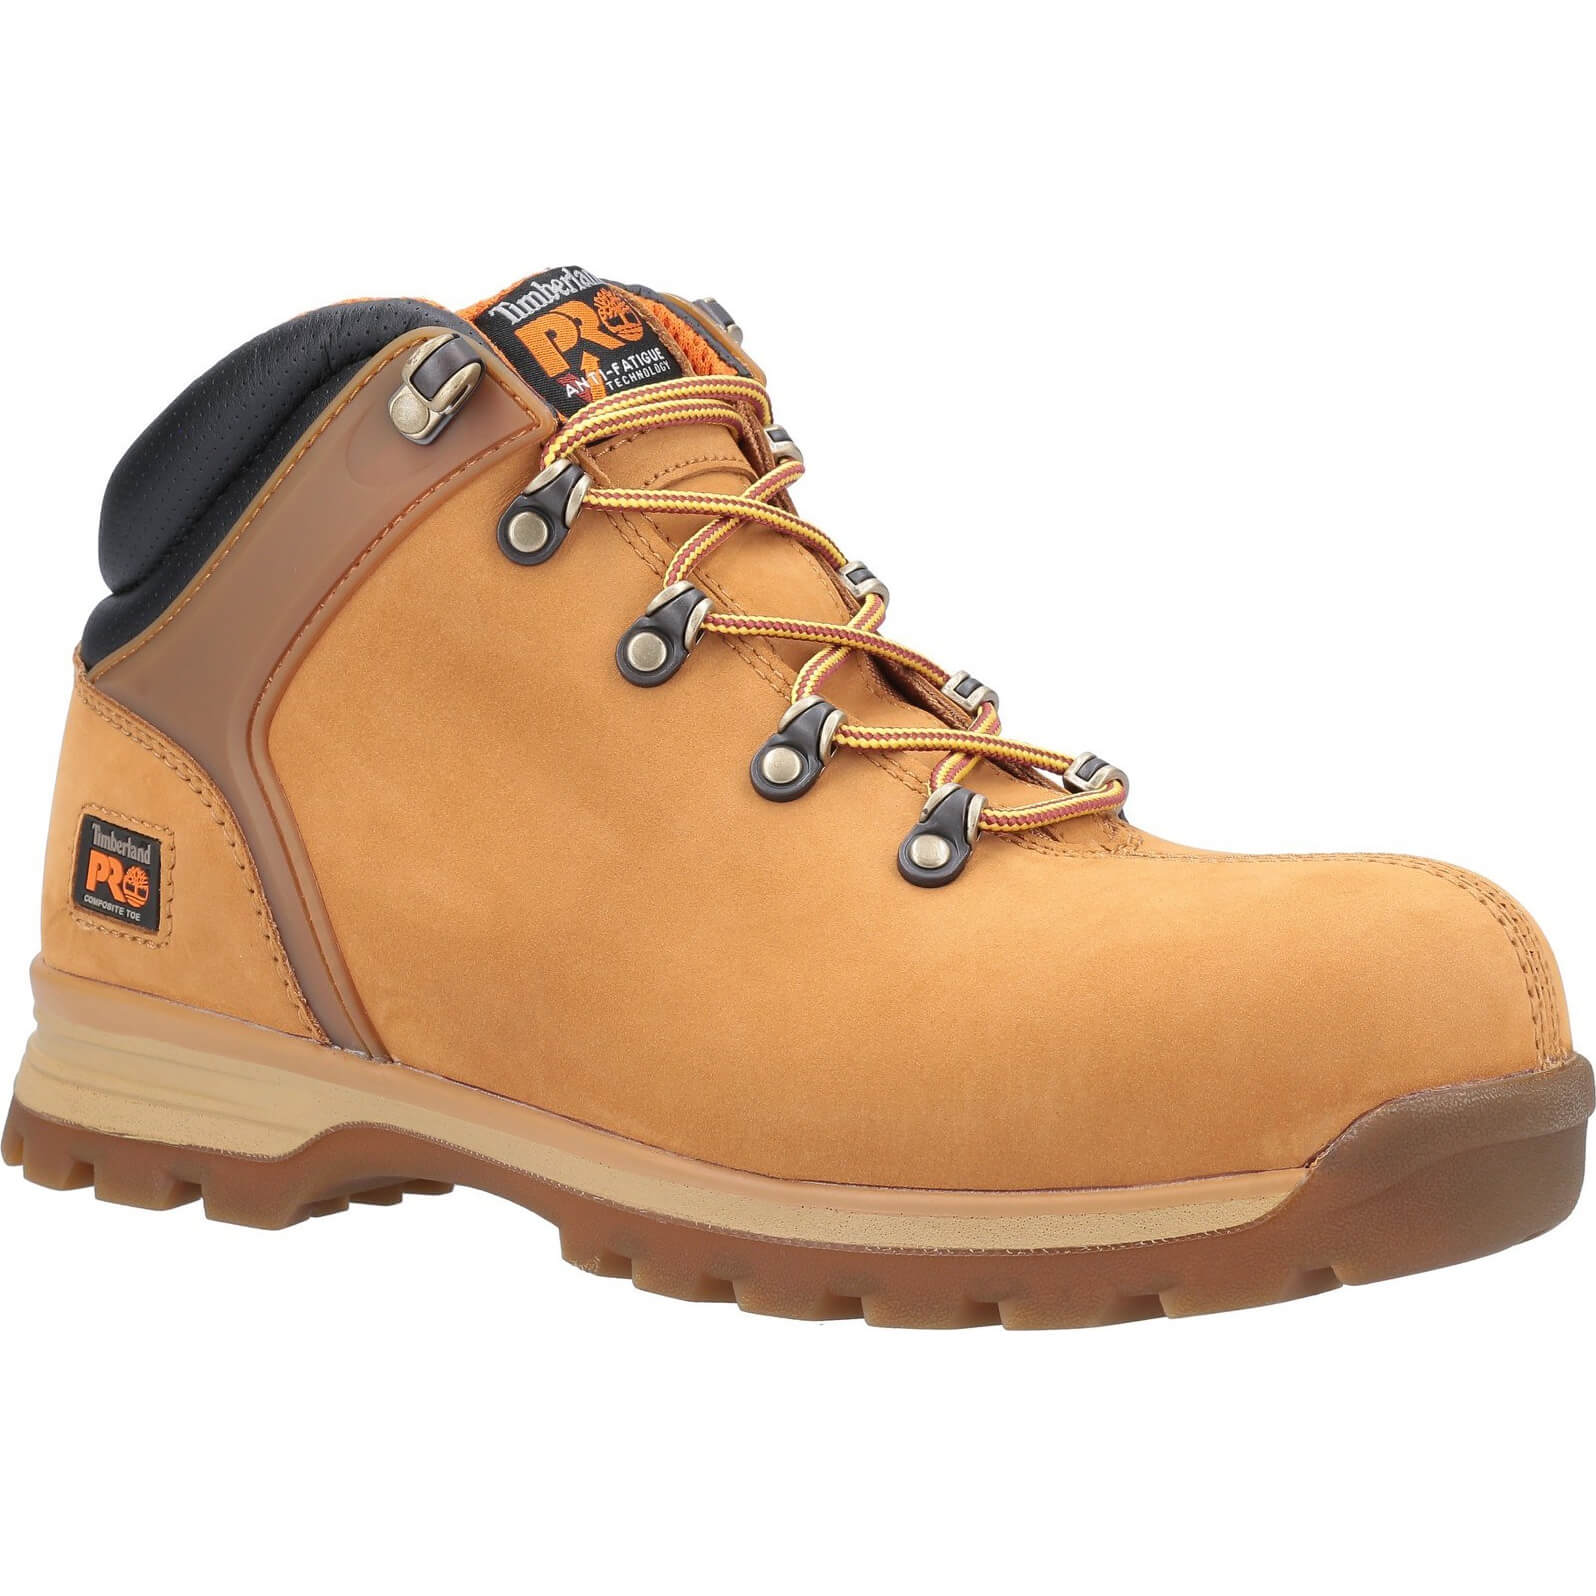 Image of Timberland Pro Splitrock XT Composite Safety Toe Work Boot Wheat Size 13